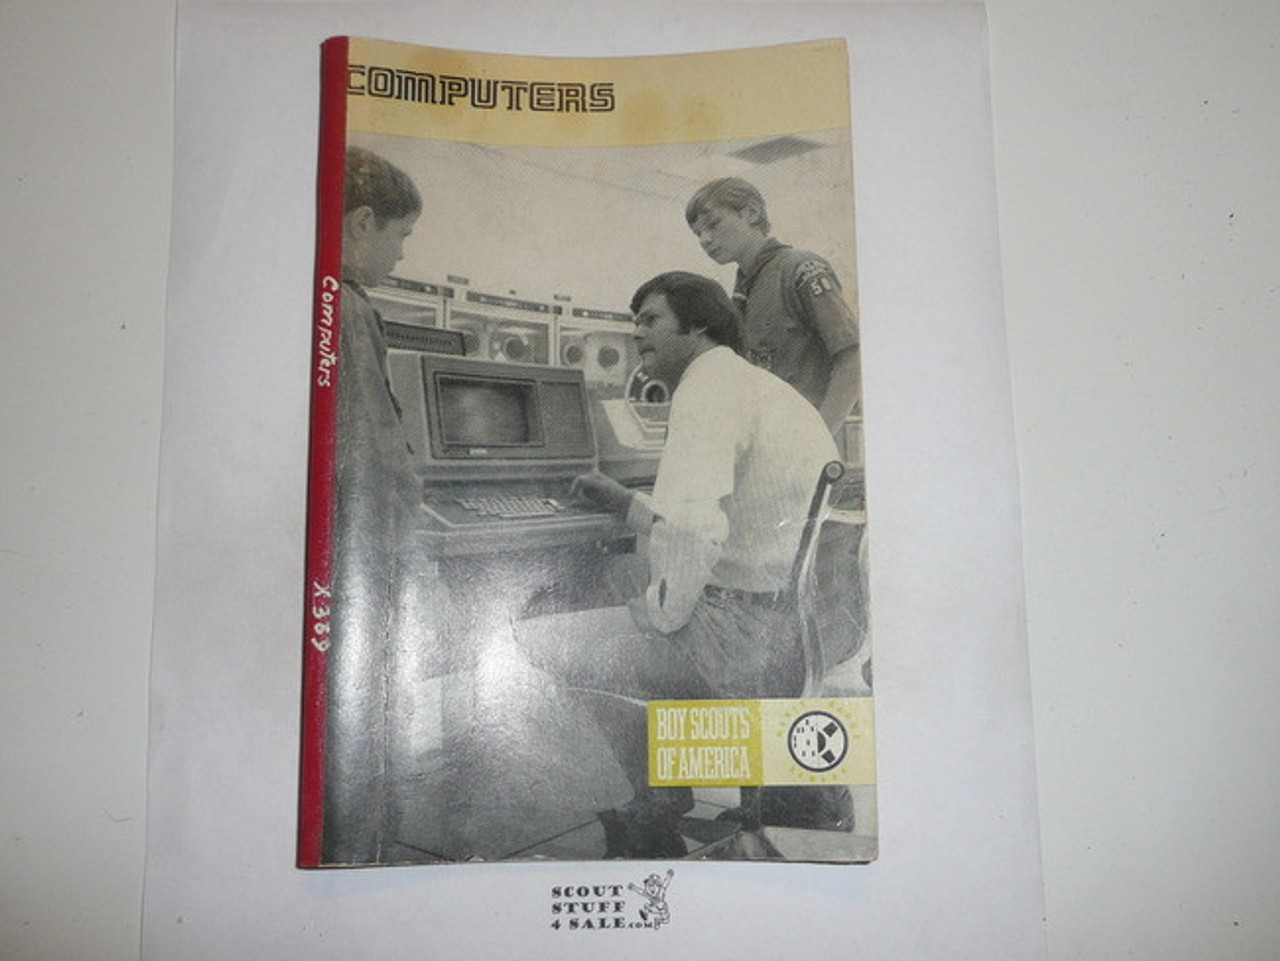 Computers Merit Badge Pamphlet, Type 8, Green Band Cover, 6-73 Printing